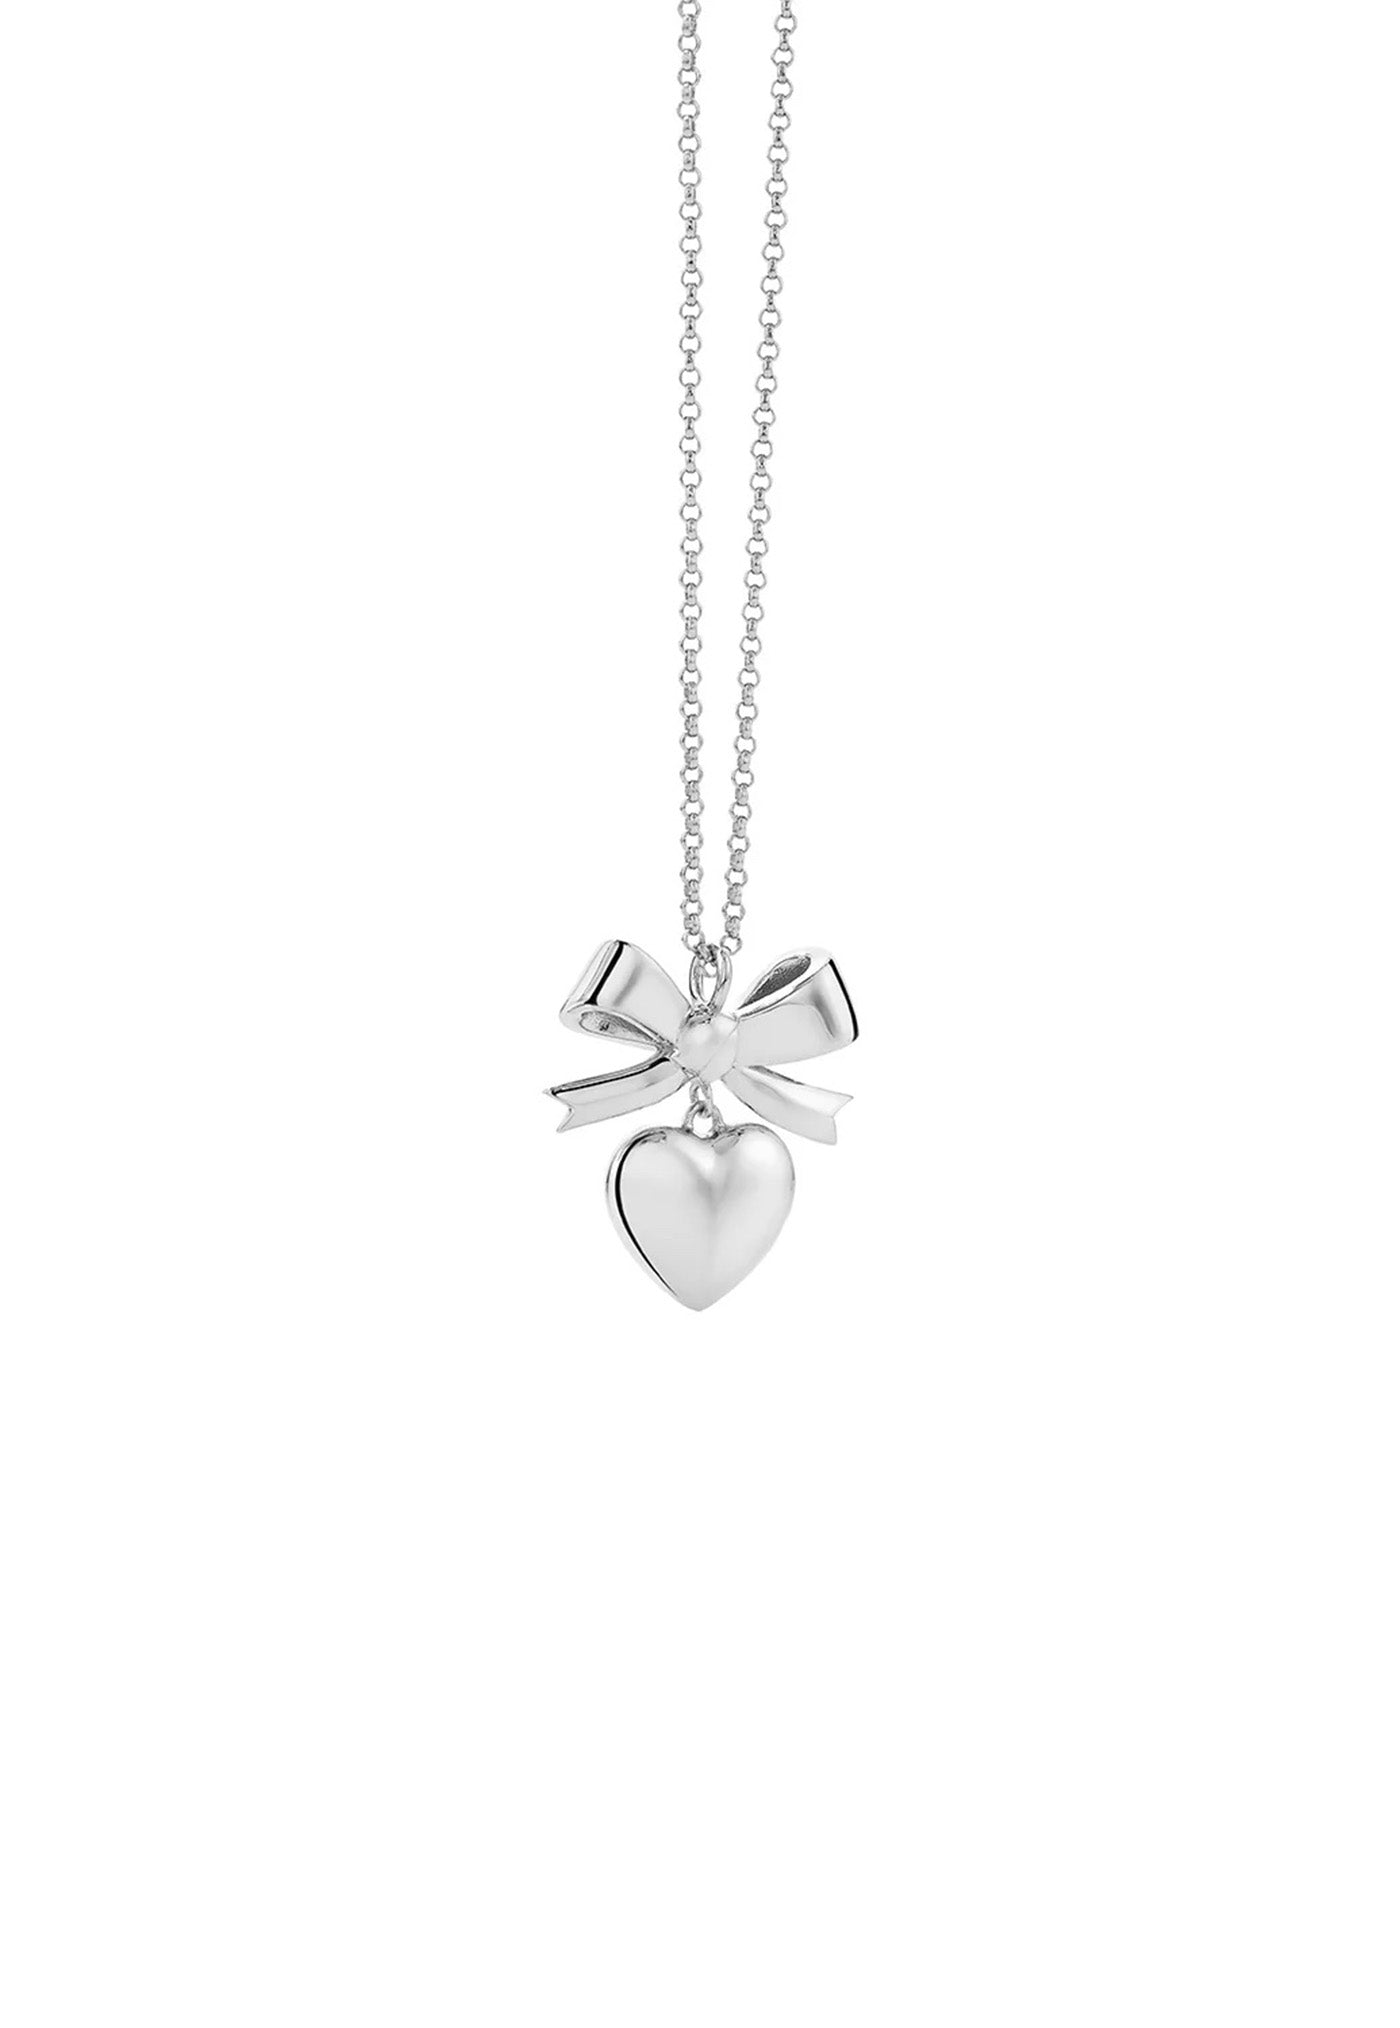 Superlove Bow Necklace - Silver sold by Angel Divine